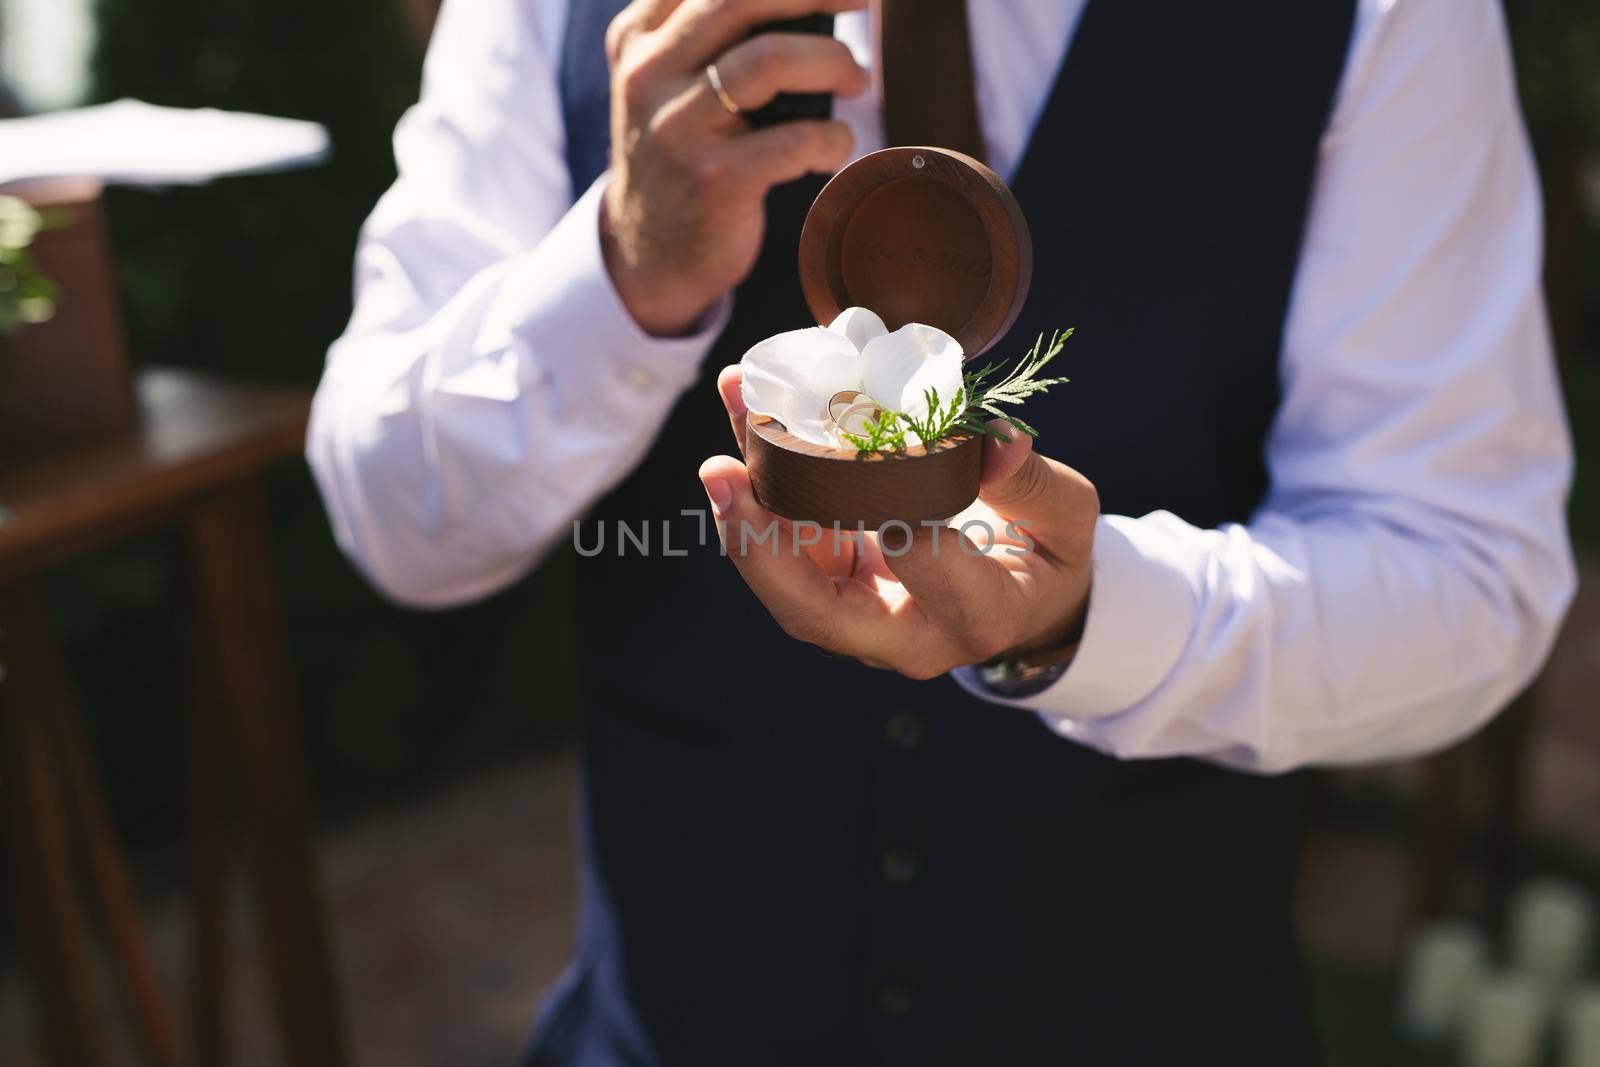 Wedding gold rings in a wooden box, wedding rings in the hands of the groom by StudioPeace